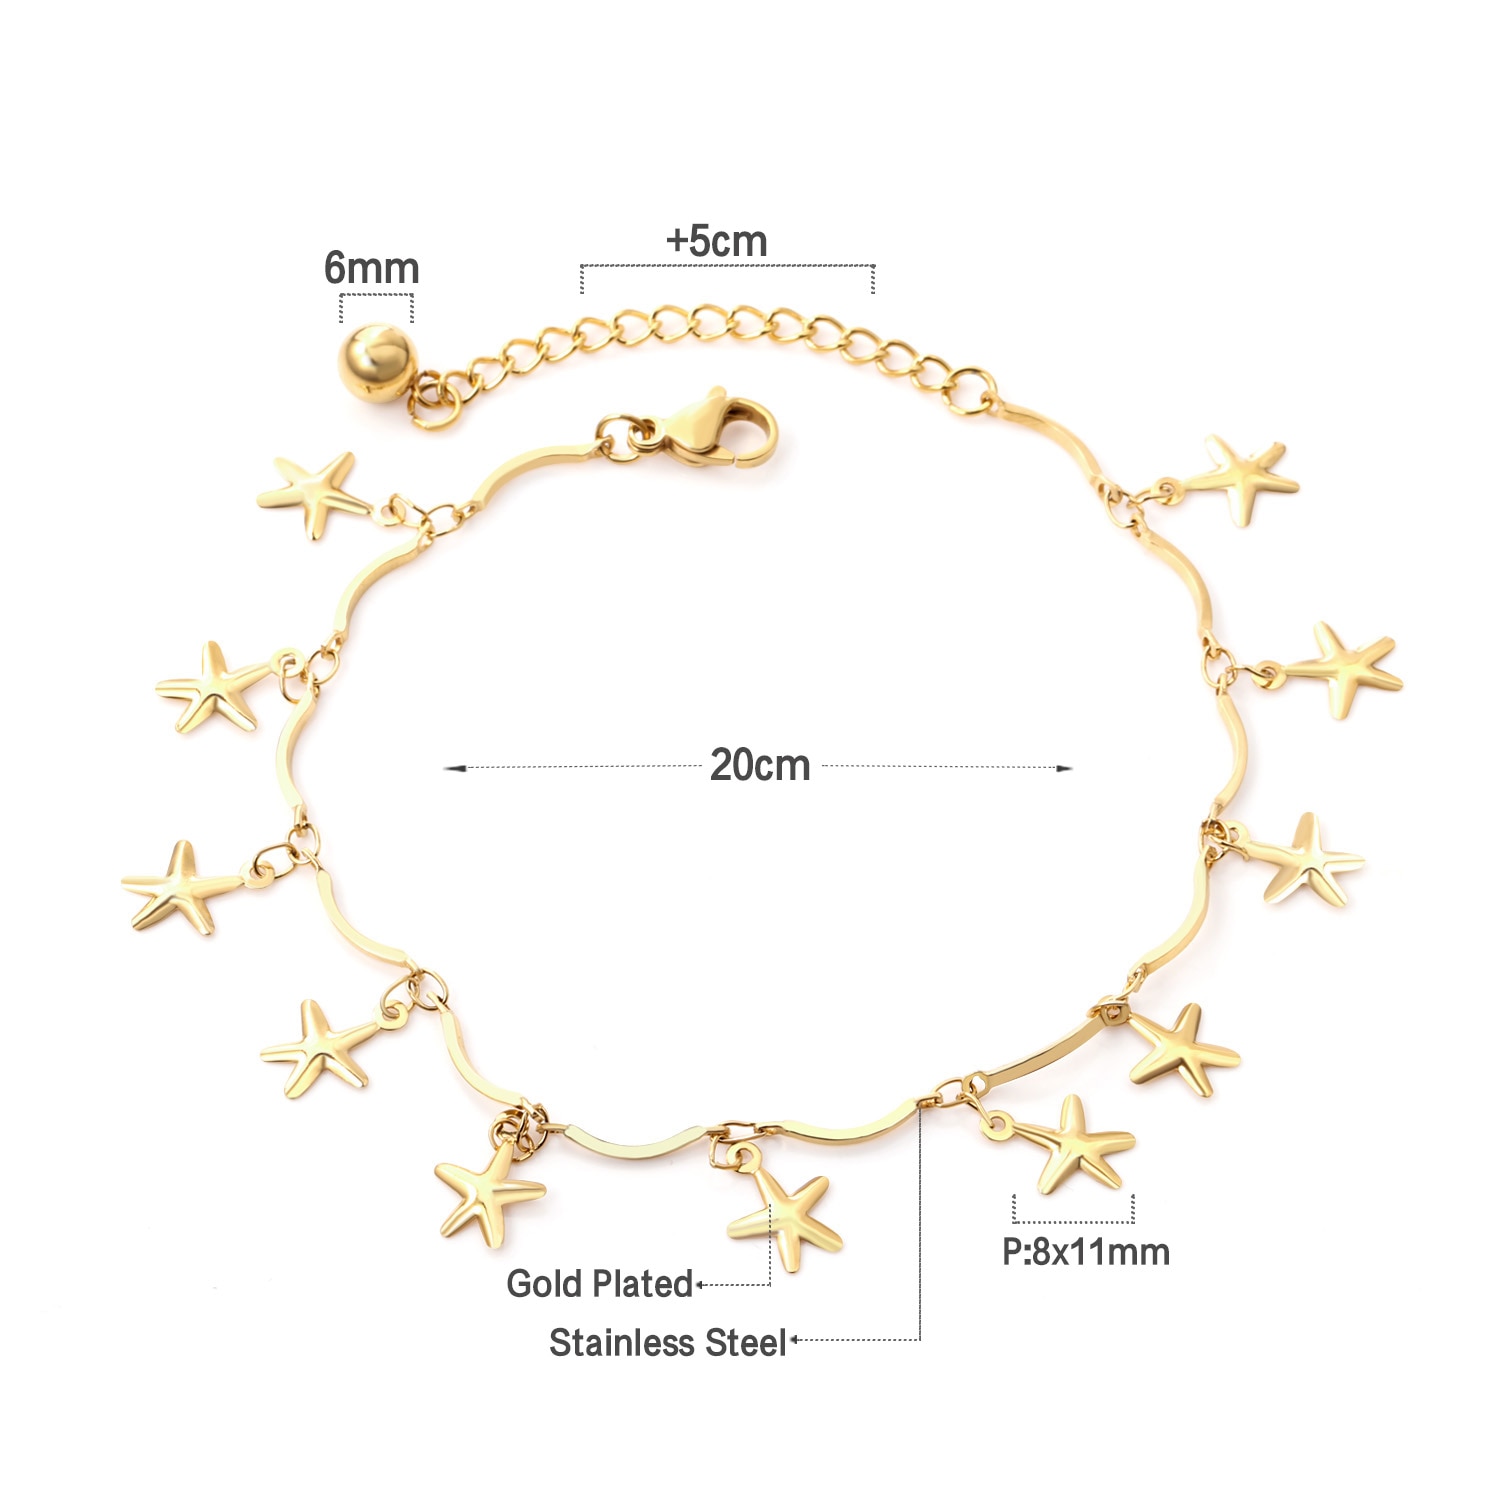 TESSA – Stainless Steel Starfish Chain Anklet Anklets Brand Name: LUXUSTEEL